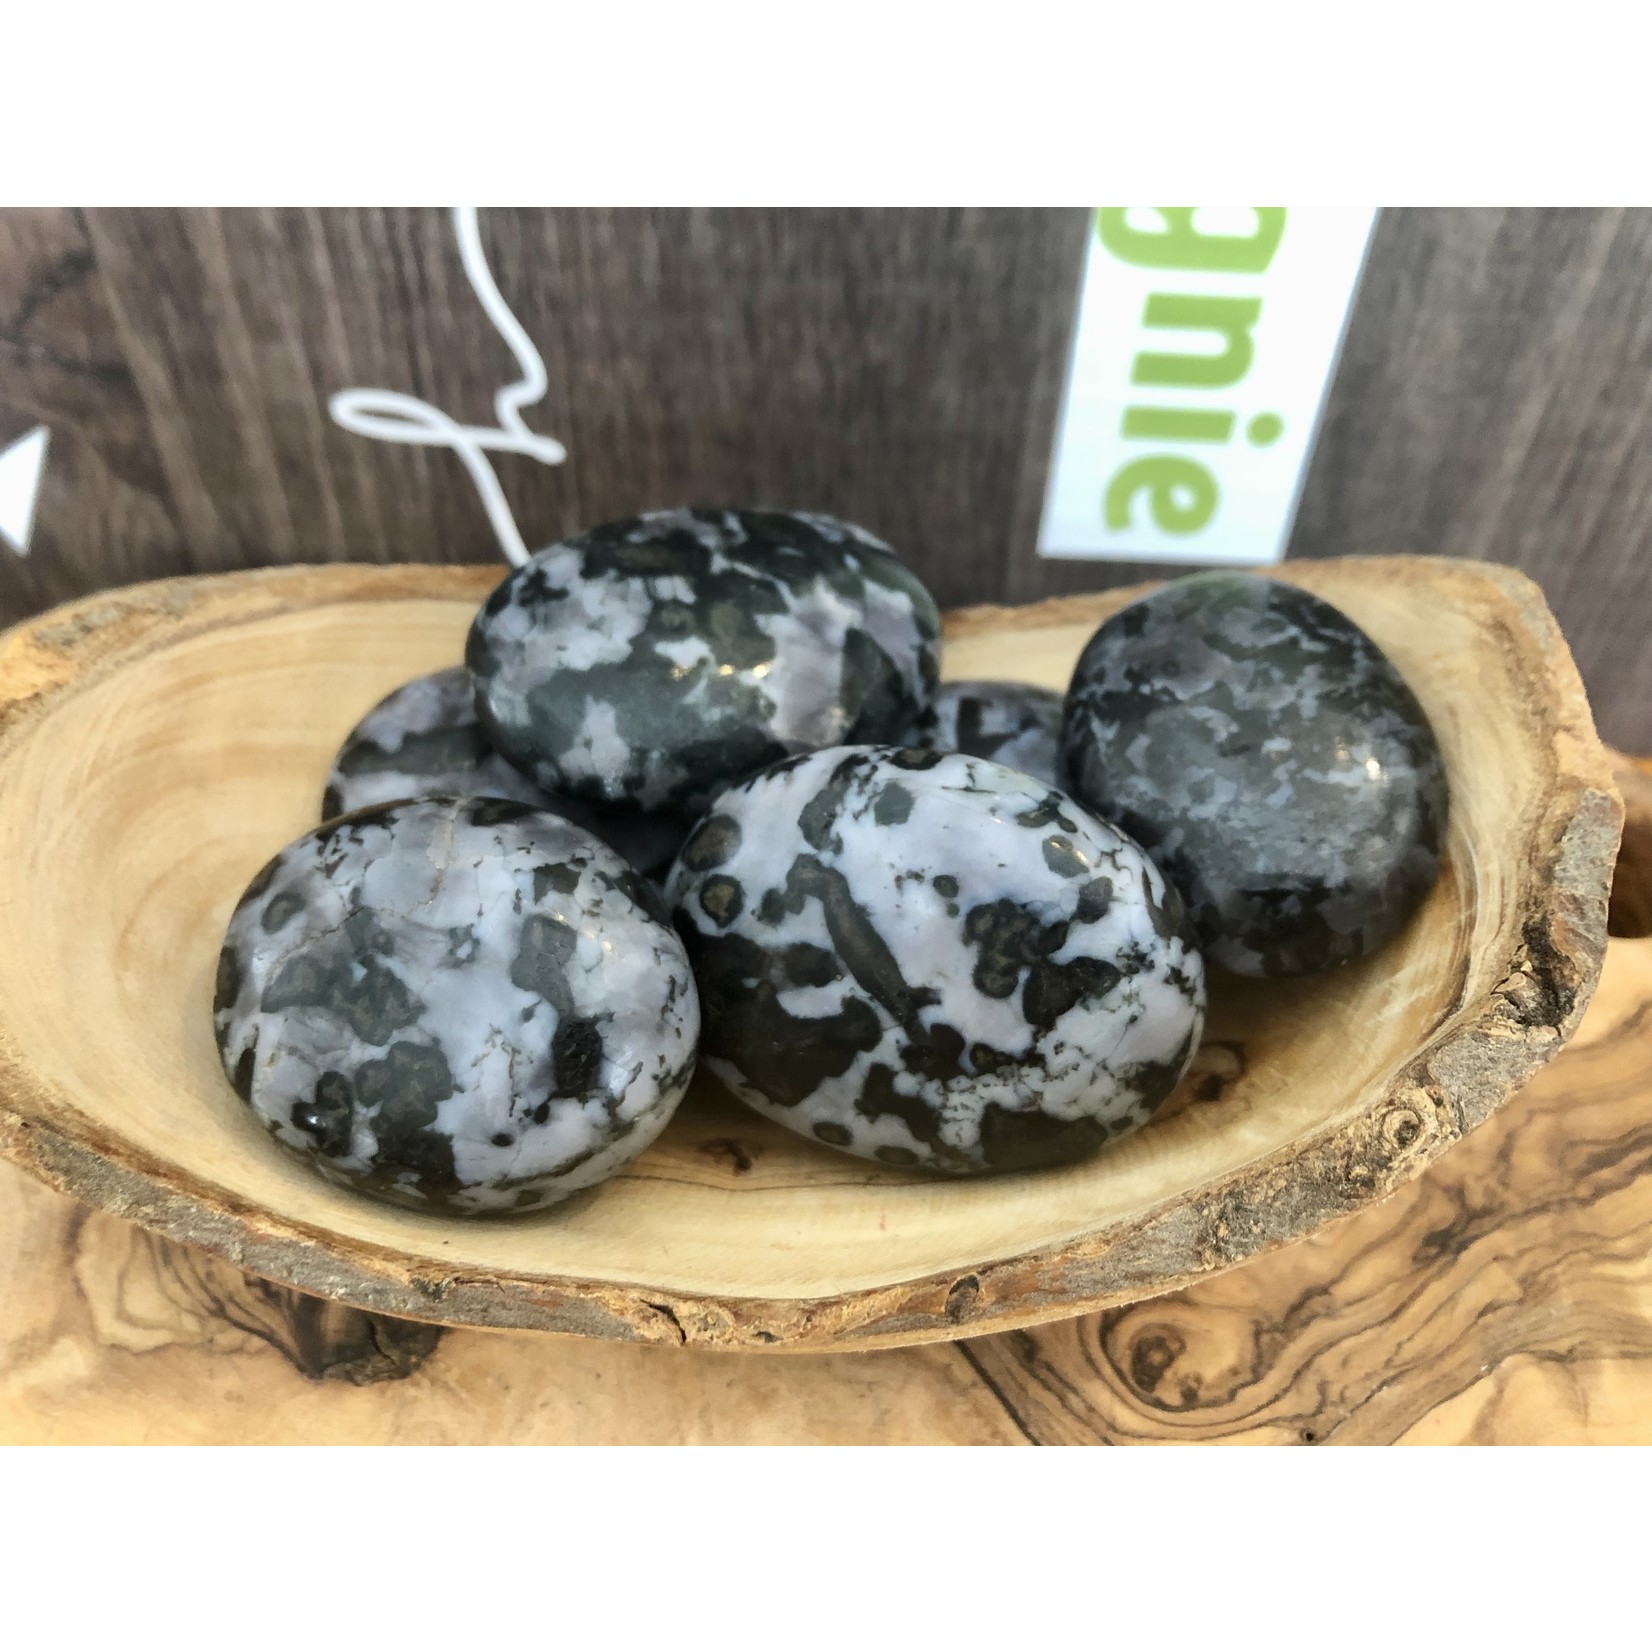 soft merlinite gabbro pebble, also called mystical merlinite, stone in homage to the magician Merlin, it would be a magic stone